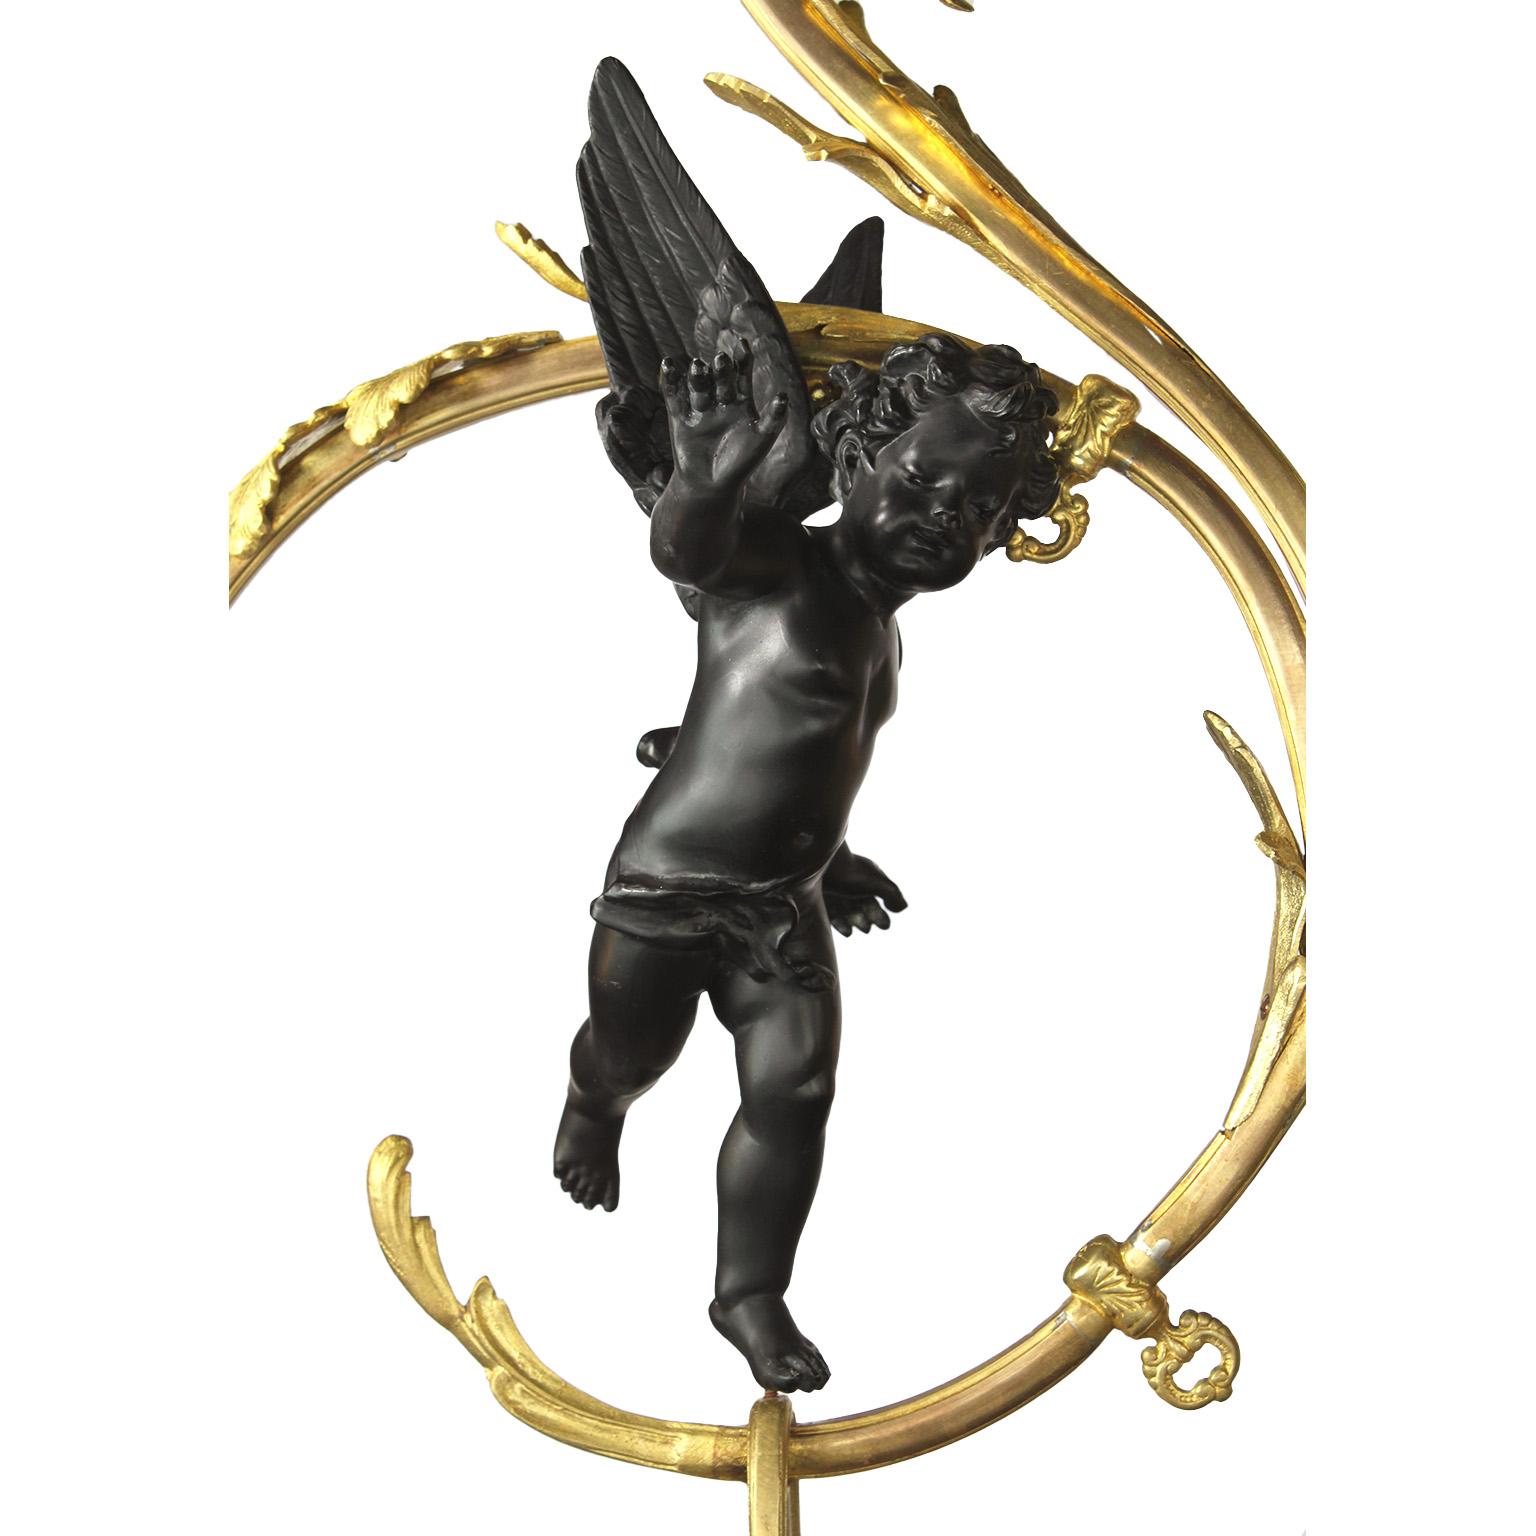 A fine whimsical French Belle Époque gilt and ebonized bronze cherub four-light gasolier pendant chandelier. The scrolled acanthus gilt-bronze frame, with its original gas key-valves surmounted with four frosted glass floral shades and centered with